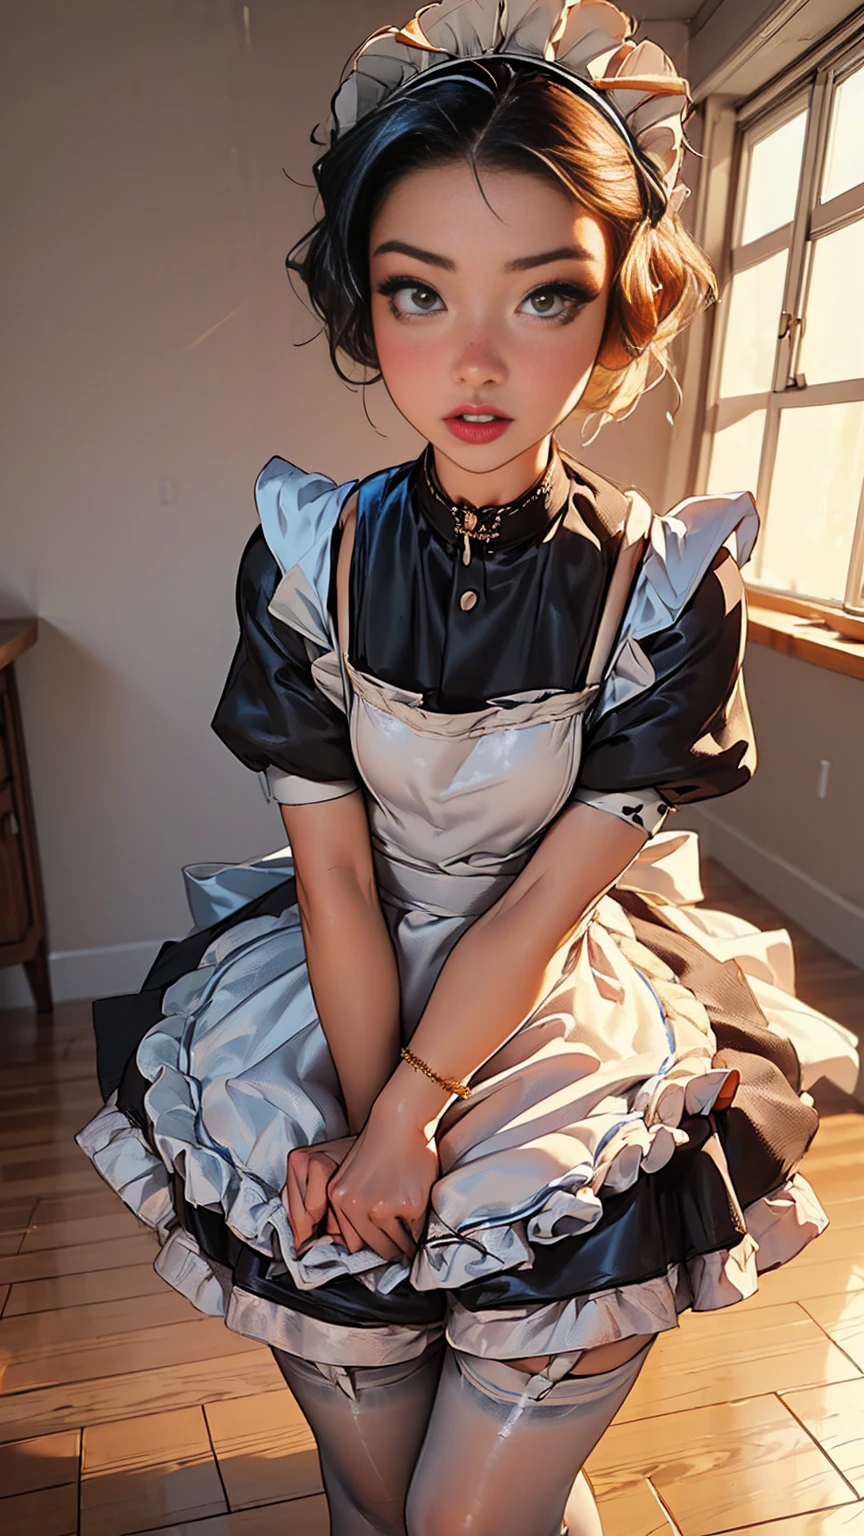 ((beautiful detailed maid (in maid clothes:1.4), 50s style:1.5)), elegant mansion interior, hyper detailed, 8k, high quality, ultra realistic, realistic lighting, photorealistic, cinematic, highly detailed face and eyes, beautiful detailed dress, intricate details, chiaroscuro lighting, dramatic shadows, warm color tones, golden hour lighting, ornate decor, luxurious furniture, parquet floors.